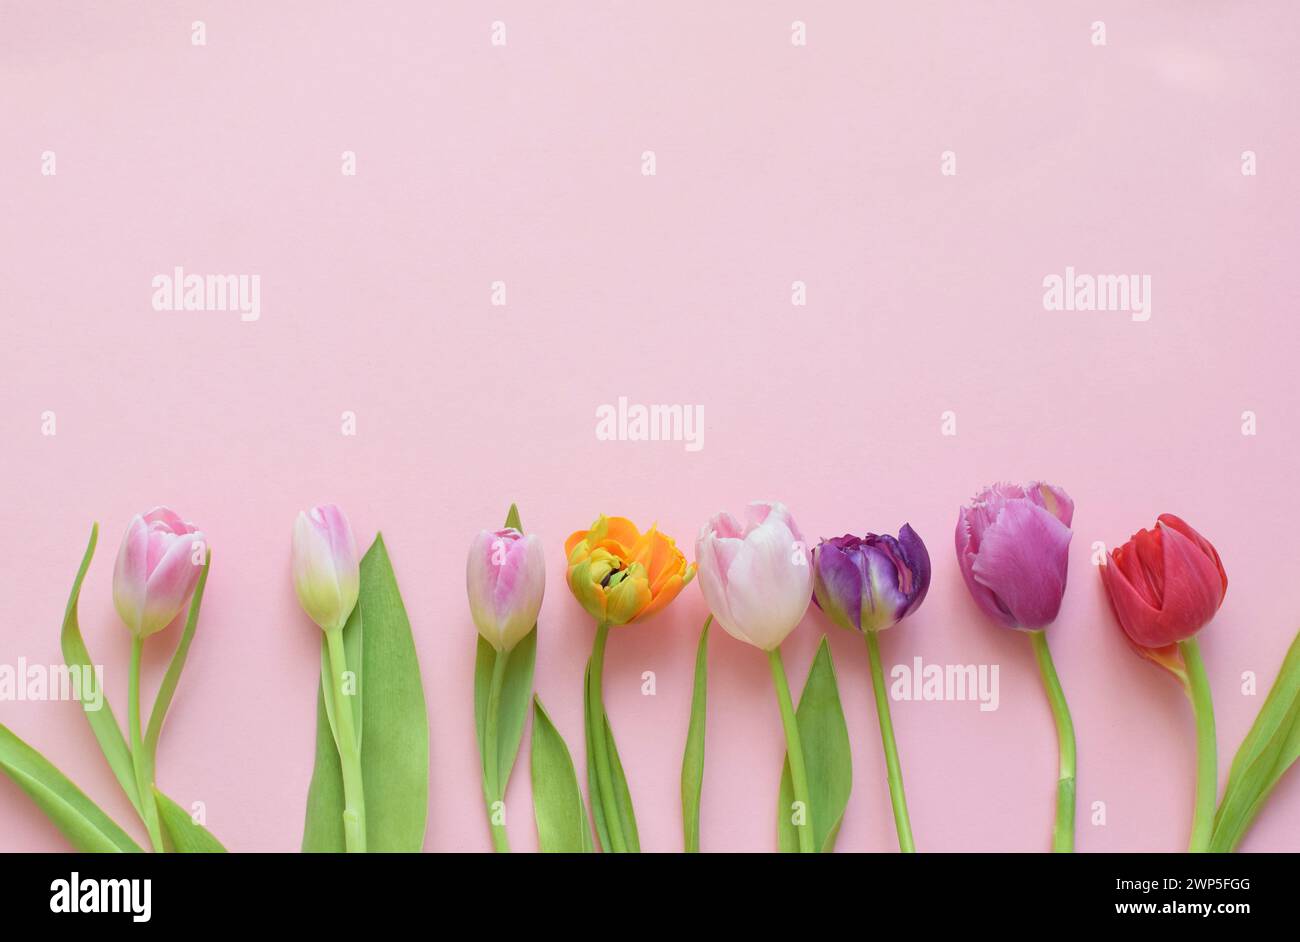 Multi-colored spring tulips and place for text for Mother's Day or Women's Day on a pink background. Top view in flat style. Stock Photo